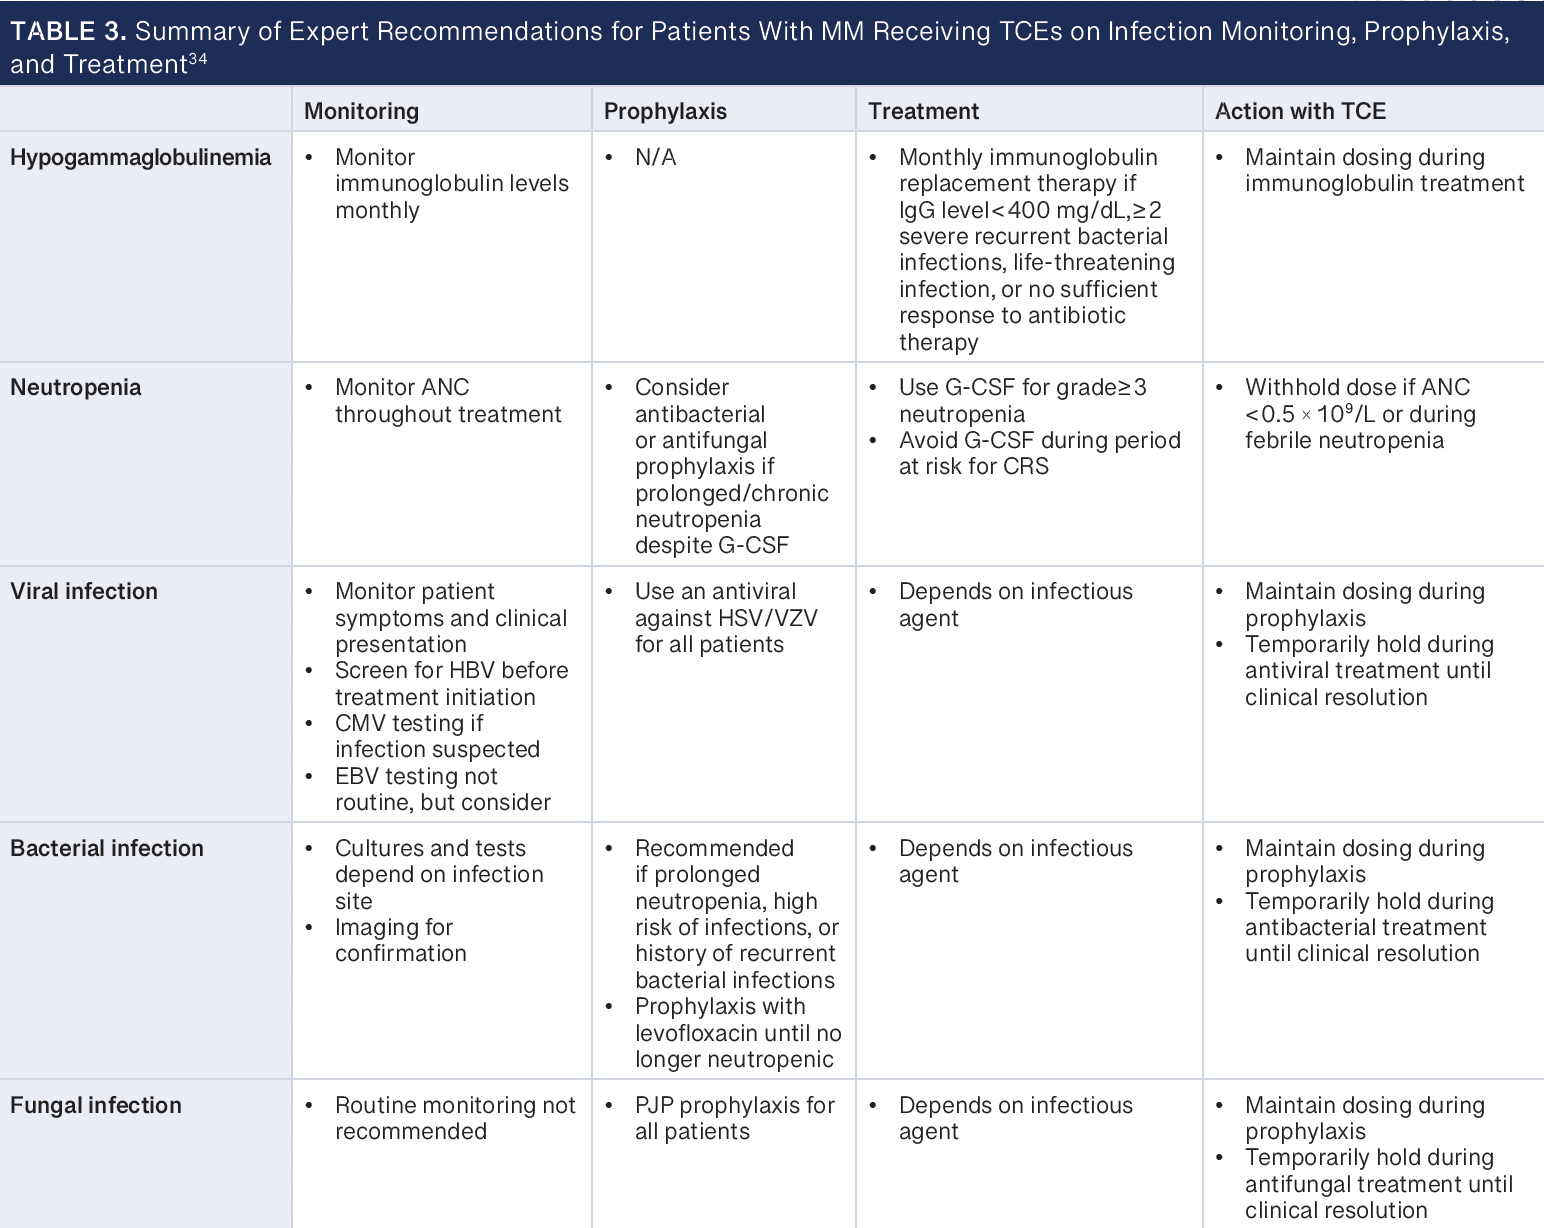 TABLE 3: Summary of Expert Recommendations for Patients With MM Receiving TCEs on Infection Monitoring, Prophylaxis, and Treatment -- ANC, absolute neutrophil count; CMV, cytomegalovirus; CRS, cytokine release syndrome; EBV, Epstein-Barr virus; G-CSF, granulocyte colony-stimulating factor; HBV, hepatitis B virus; HSV, herpes simplex virus; MM, multiple myeloma; N/A, not applicable; PJP, Pneumocystis jirovecii pneumonia; TCE, T-cell engager; VZV, varicella-zoster virus.